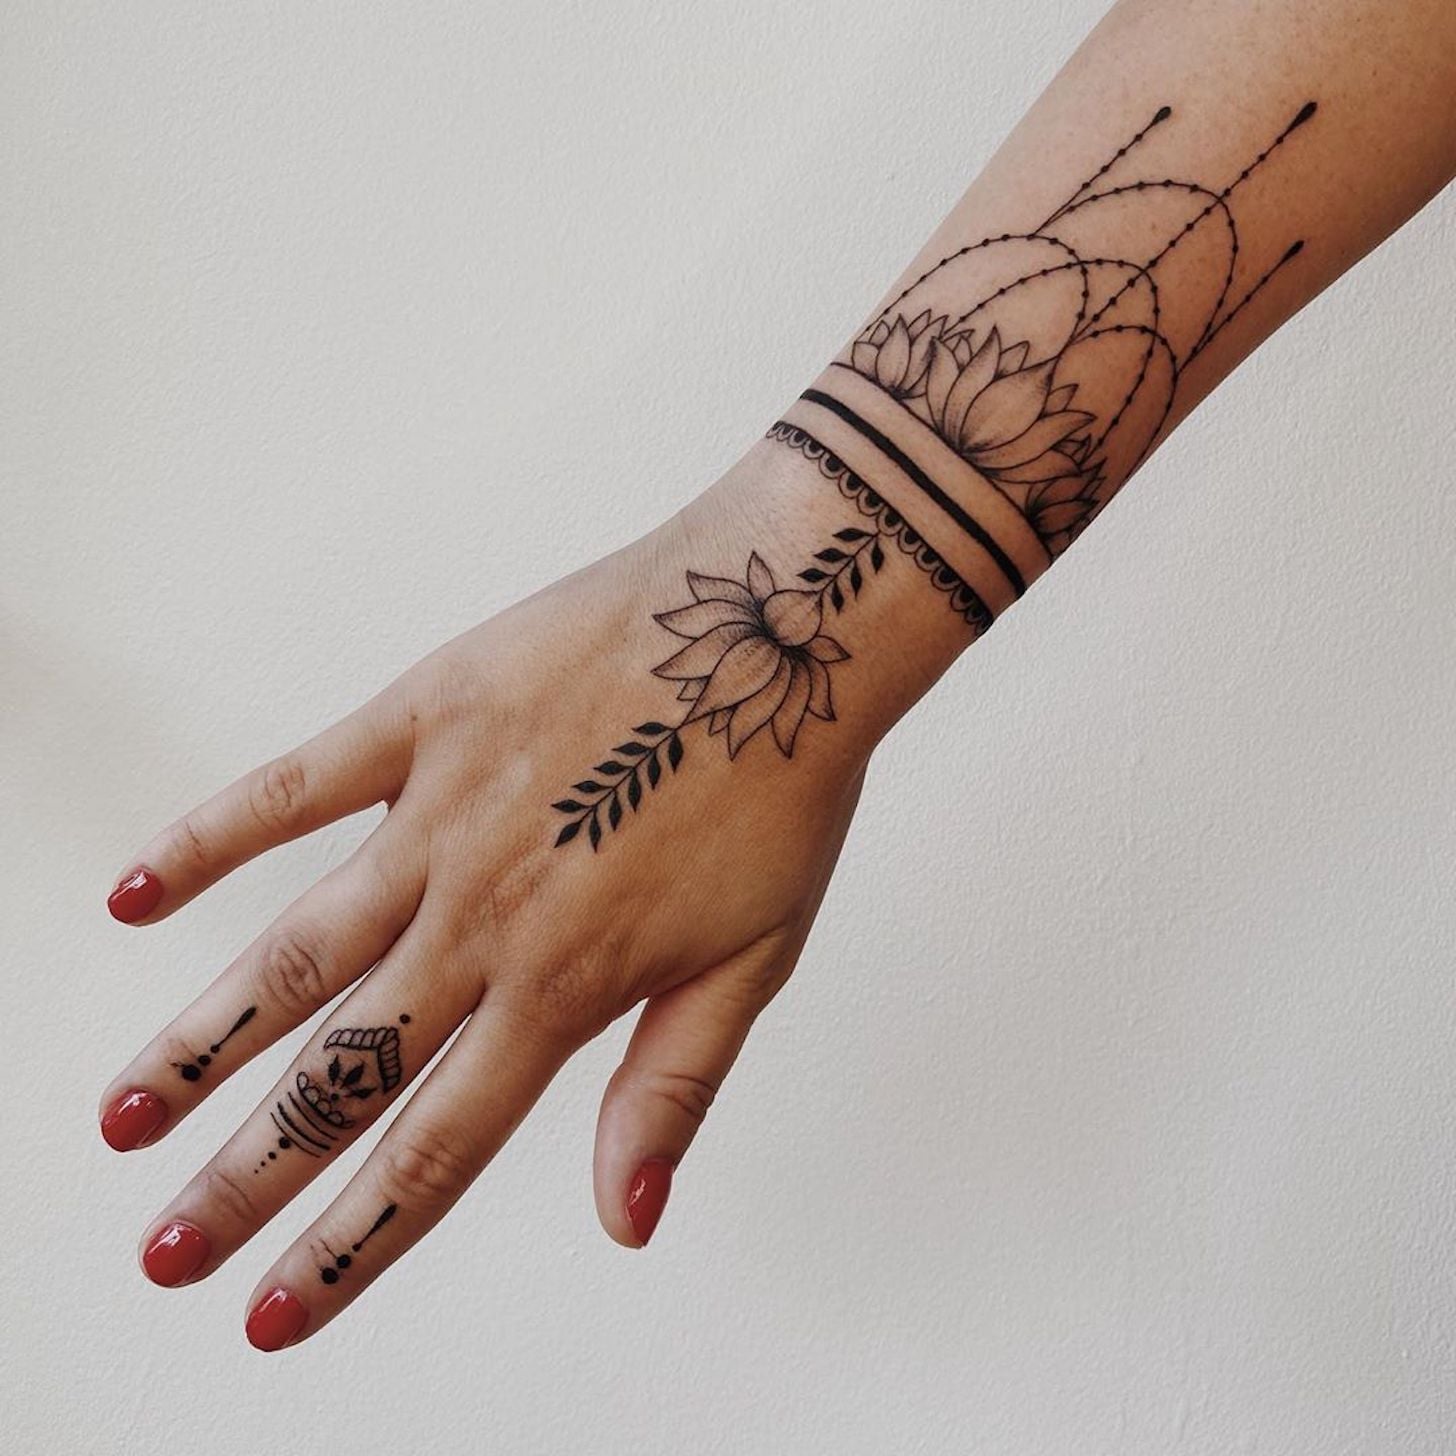 34 Finger Tattoo Design Ideas  How To Care For Your New Ink  Glamour UK